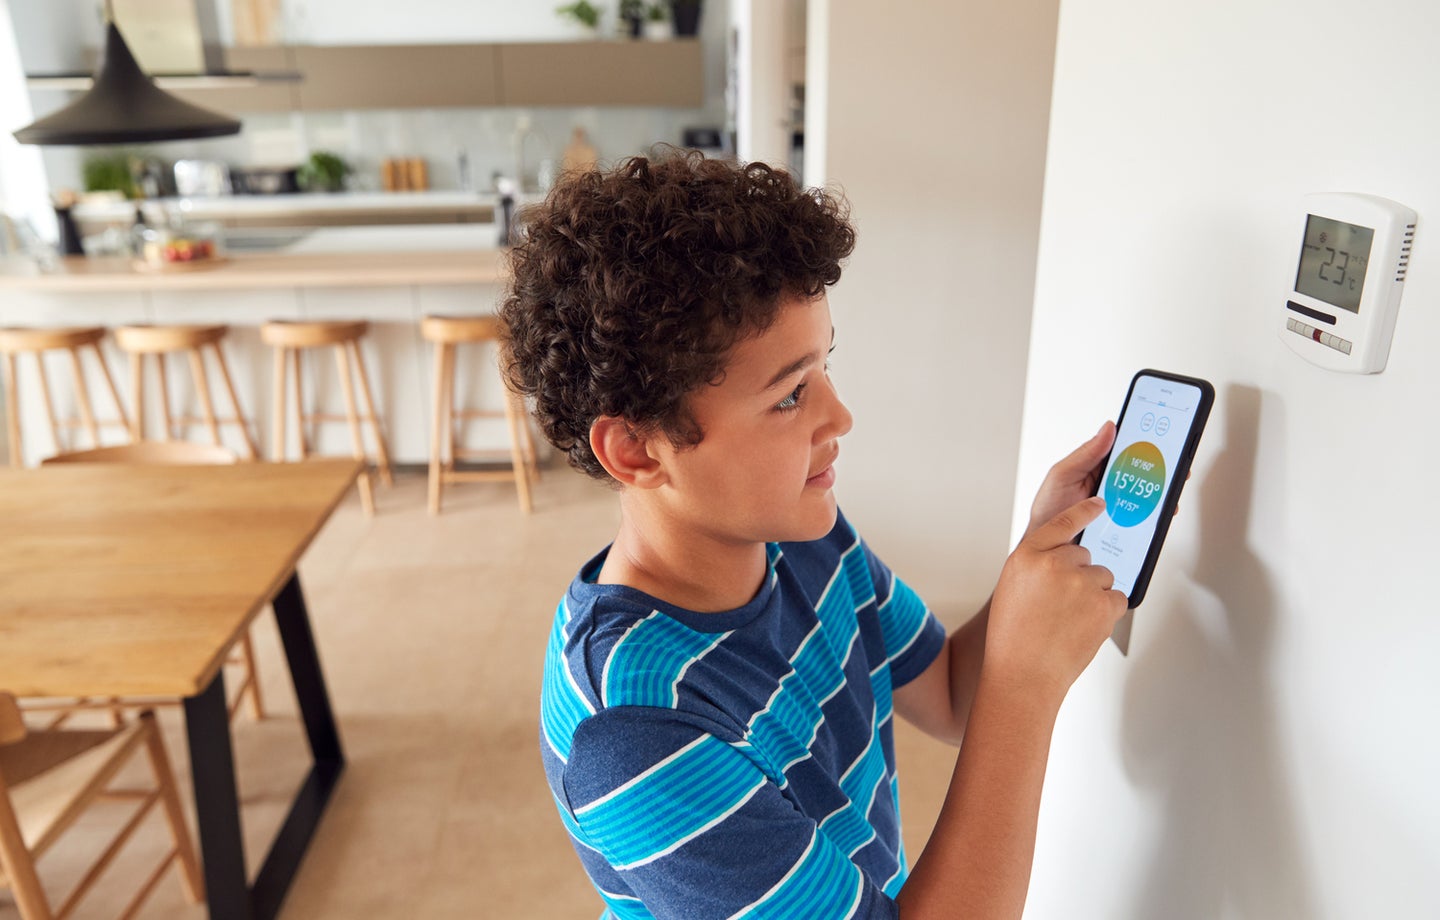 Boy Changes Temperature On Central Heating Thermostat Control Using Mobile Phone App